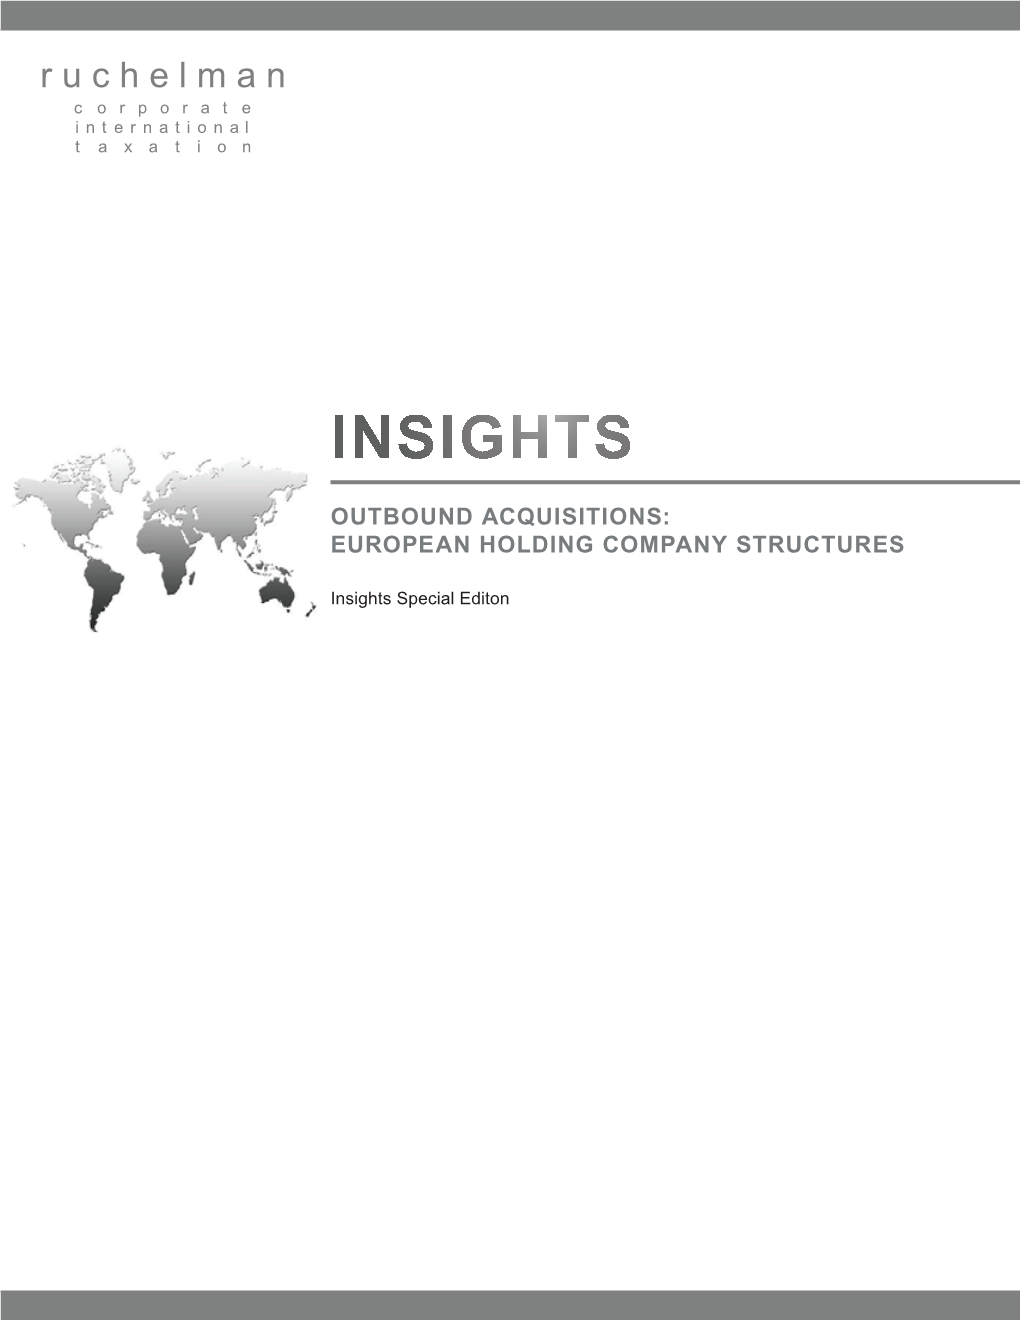 Insights Special Edition